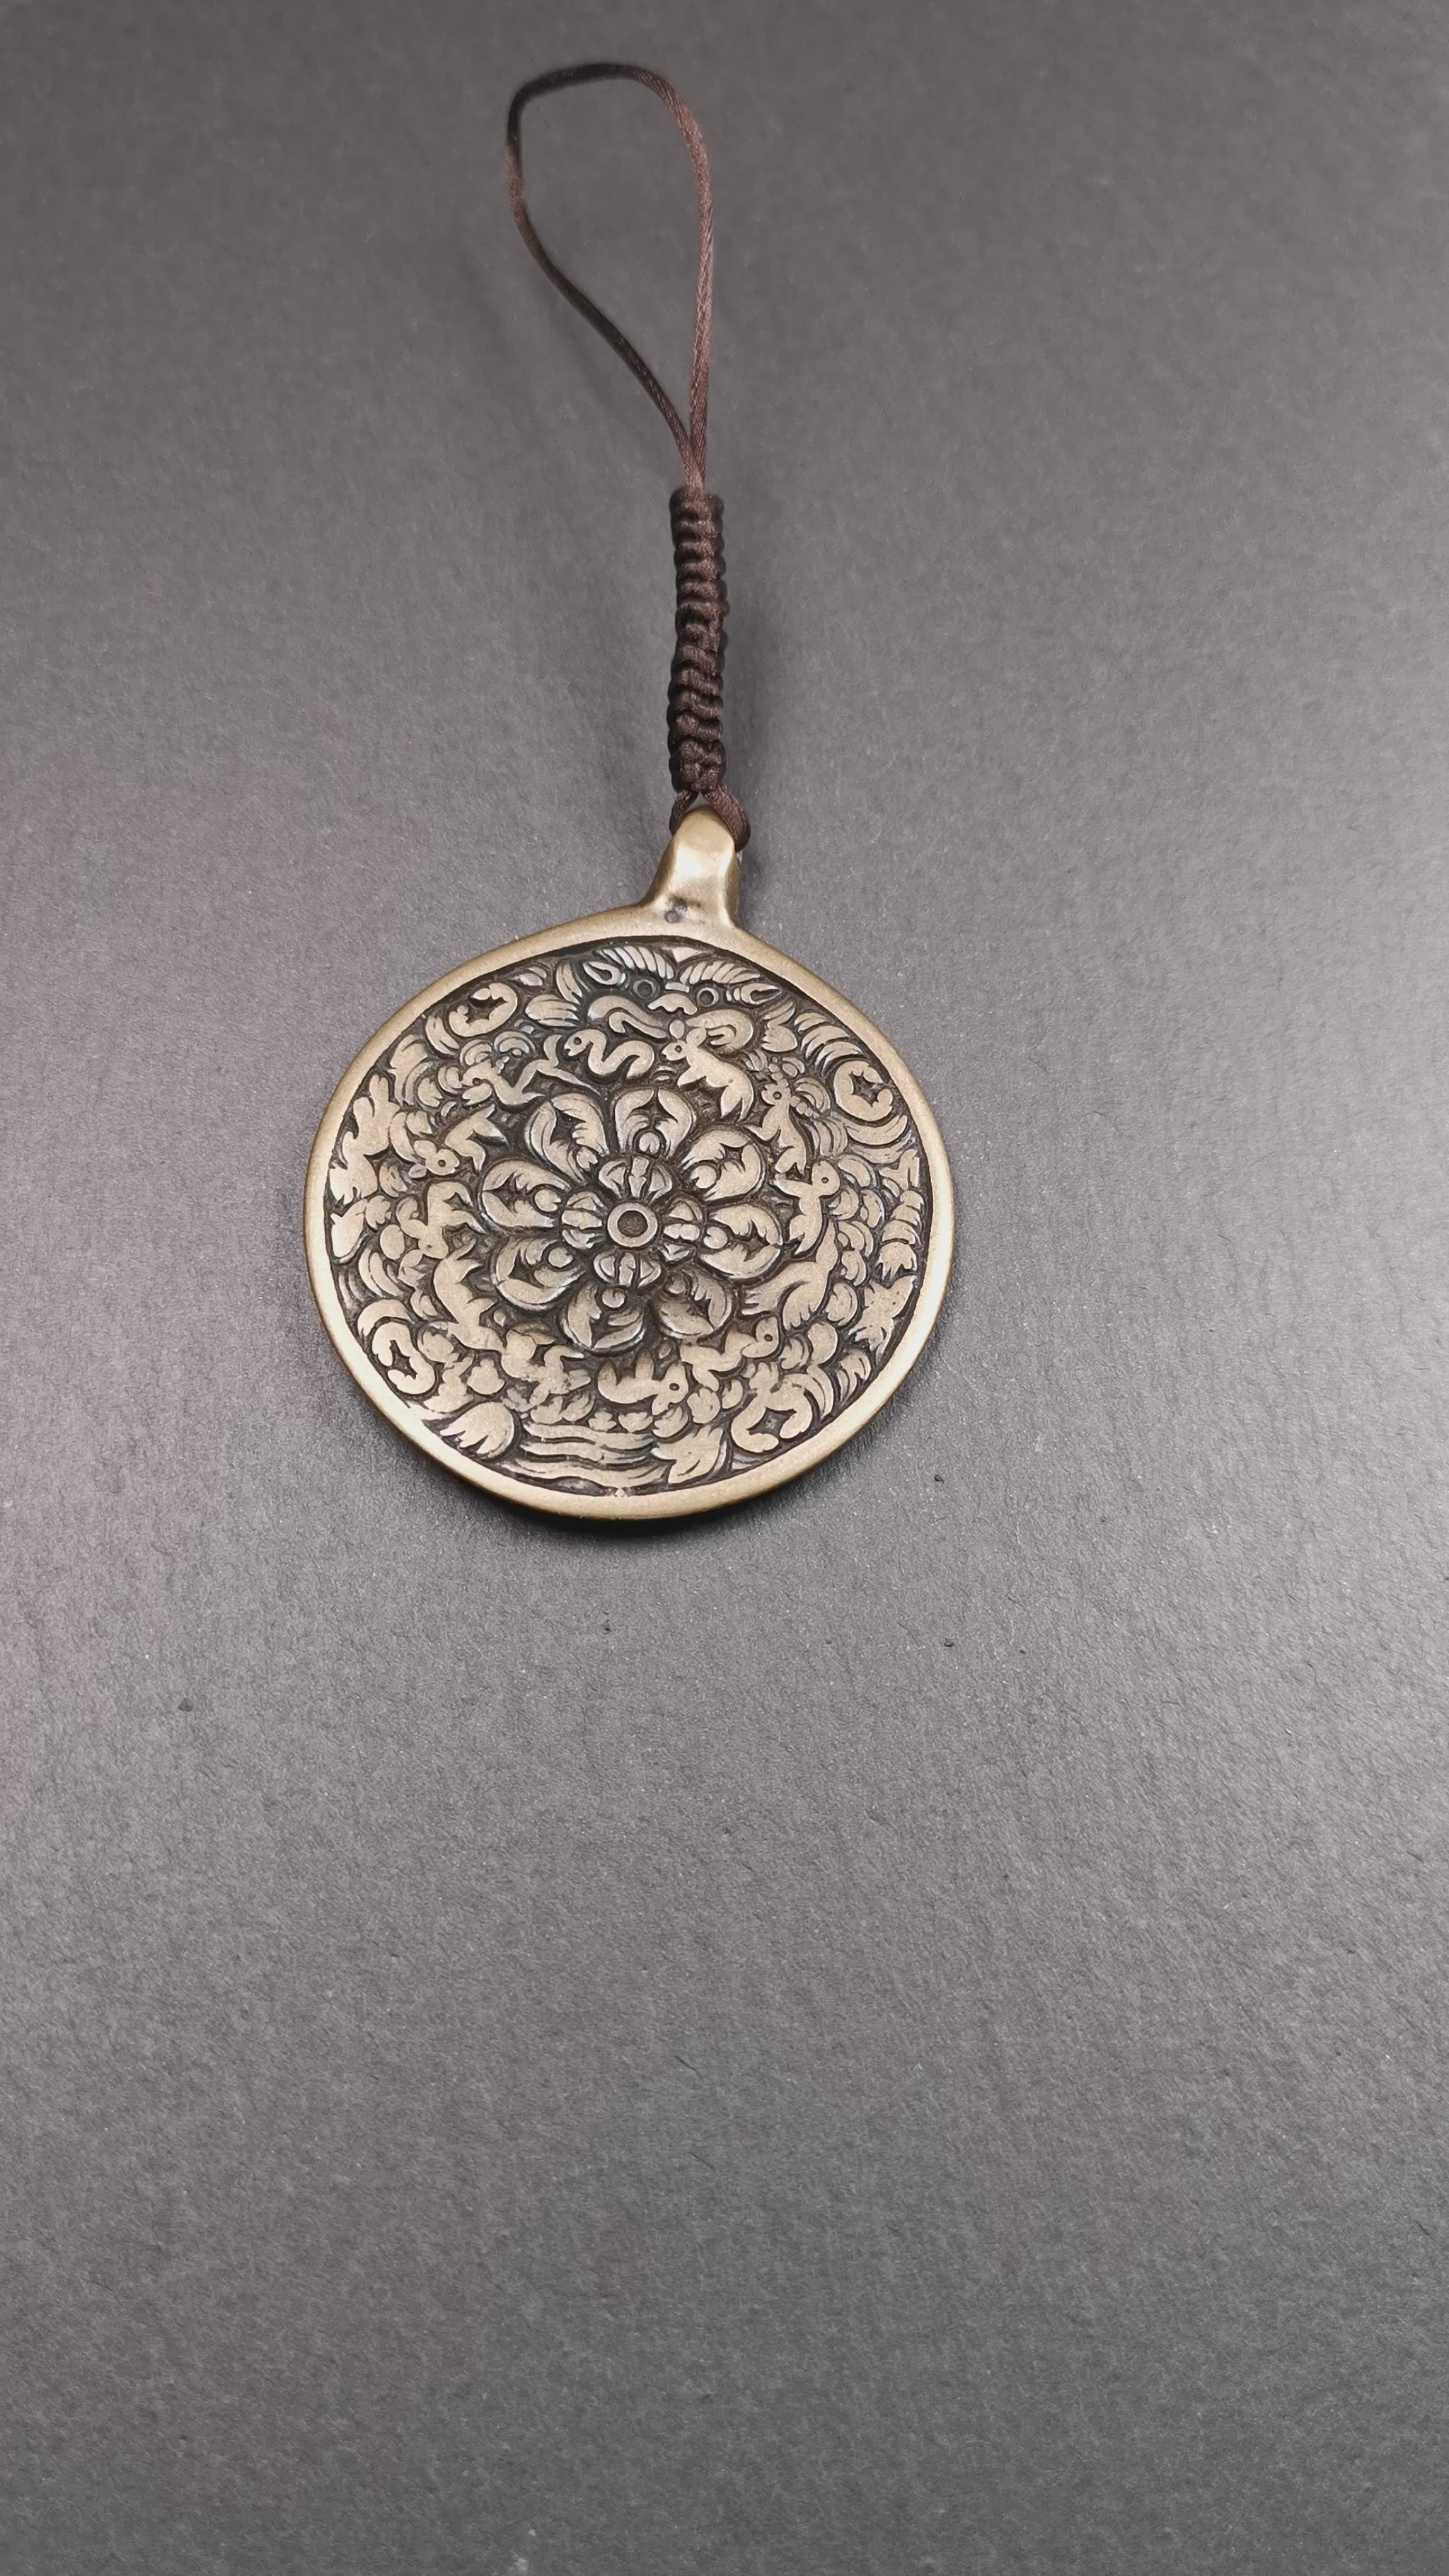 This unique meling amulet is handmade in Baiyu County Tibet,Where is the famous handicraft industry base in Tibetan areas.  It is made of lima brass,2.16 inches diameter,the front center is a very rare mandala flower shape.